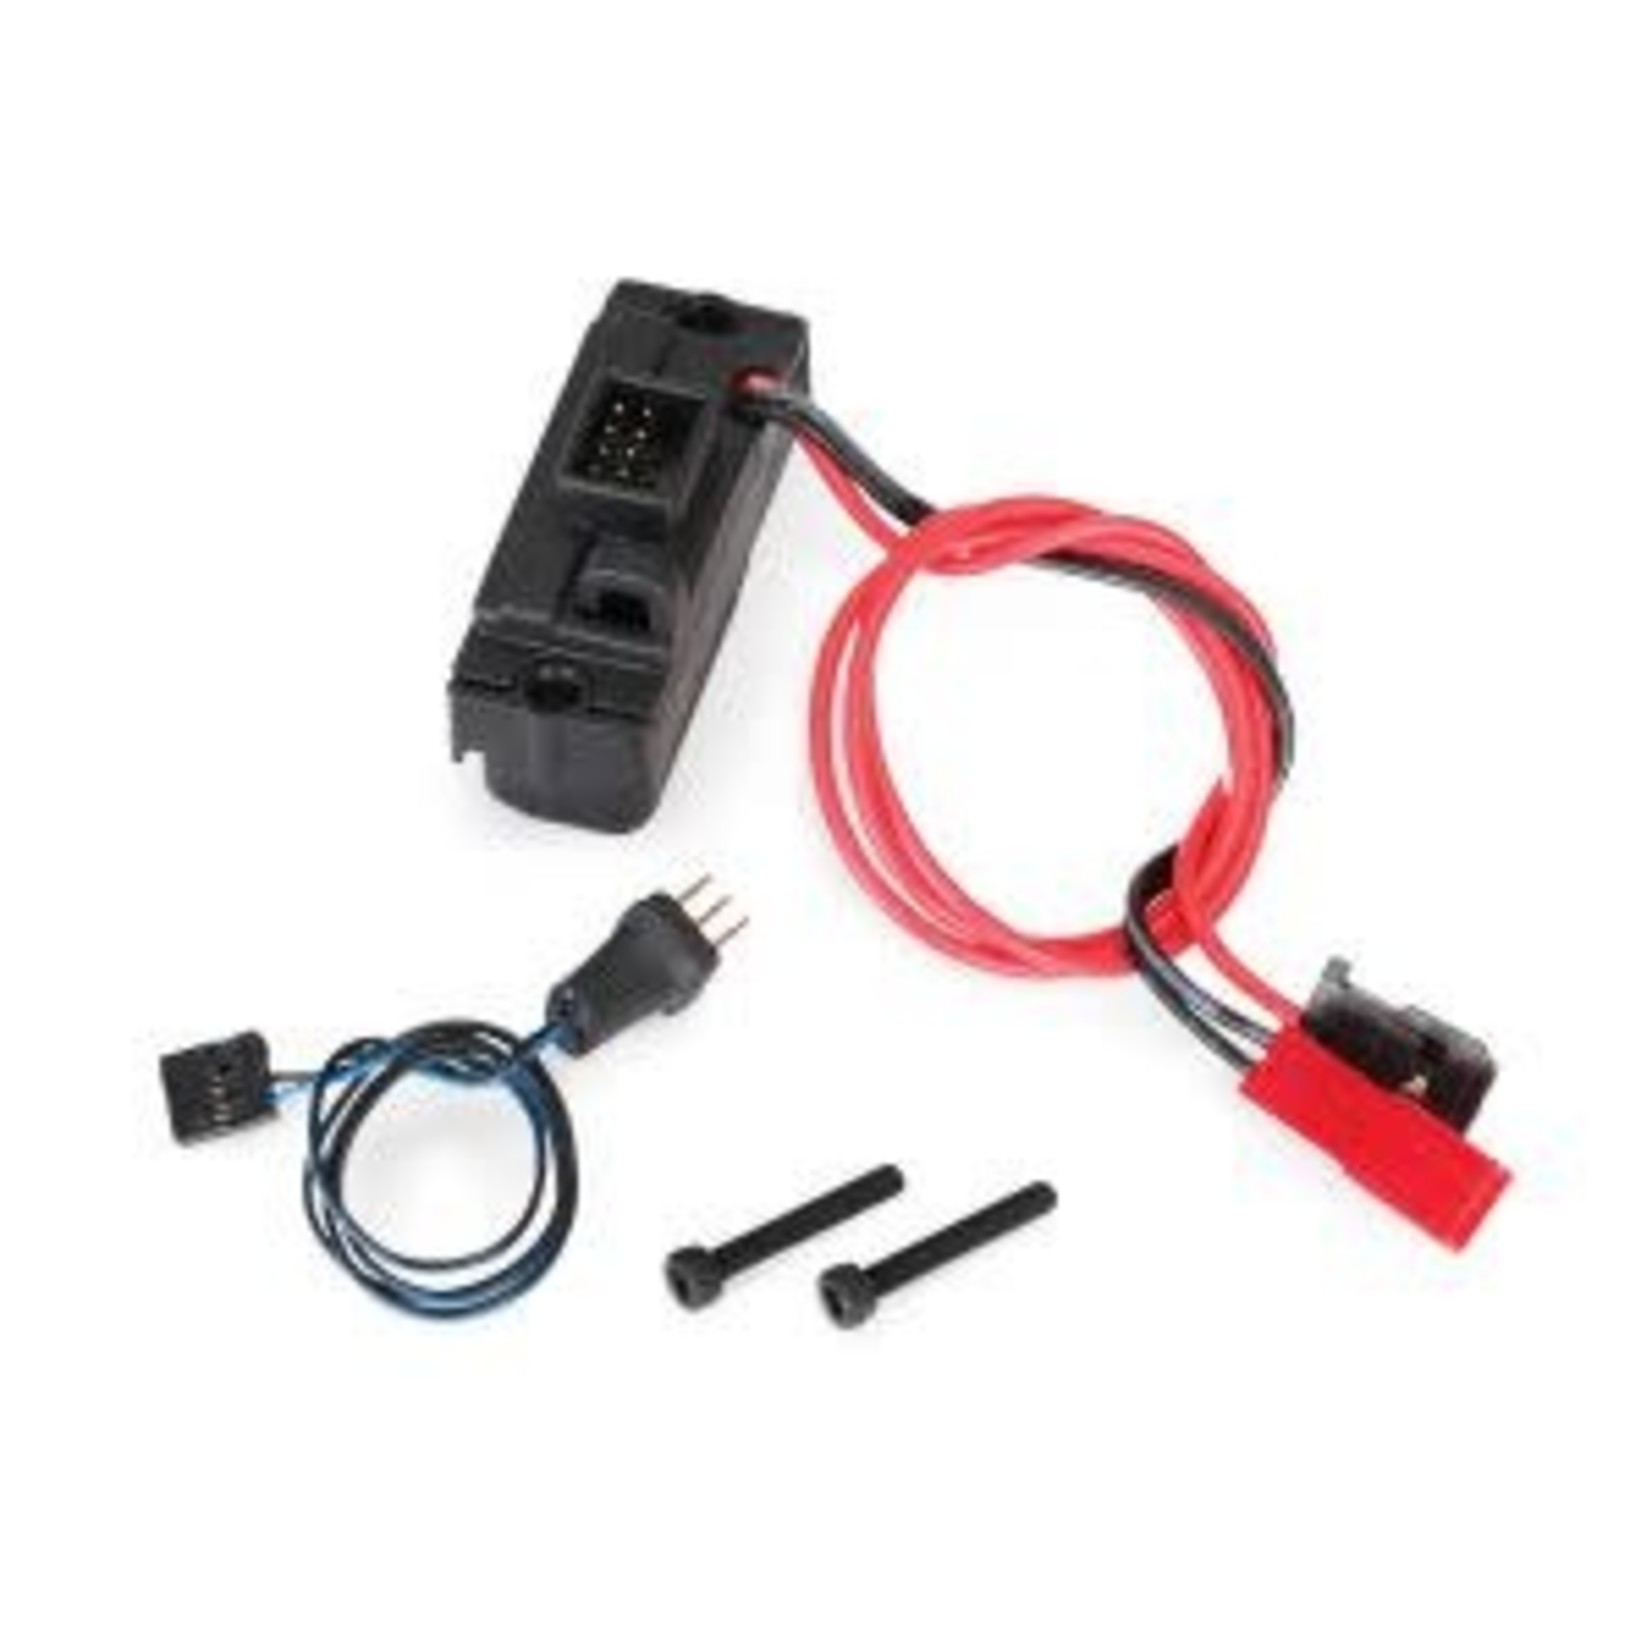 Traxxas 8028 LED lights, power supply (regulated, 3V, 0.5-amp)/ 3-in-1 wire harness